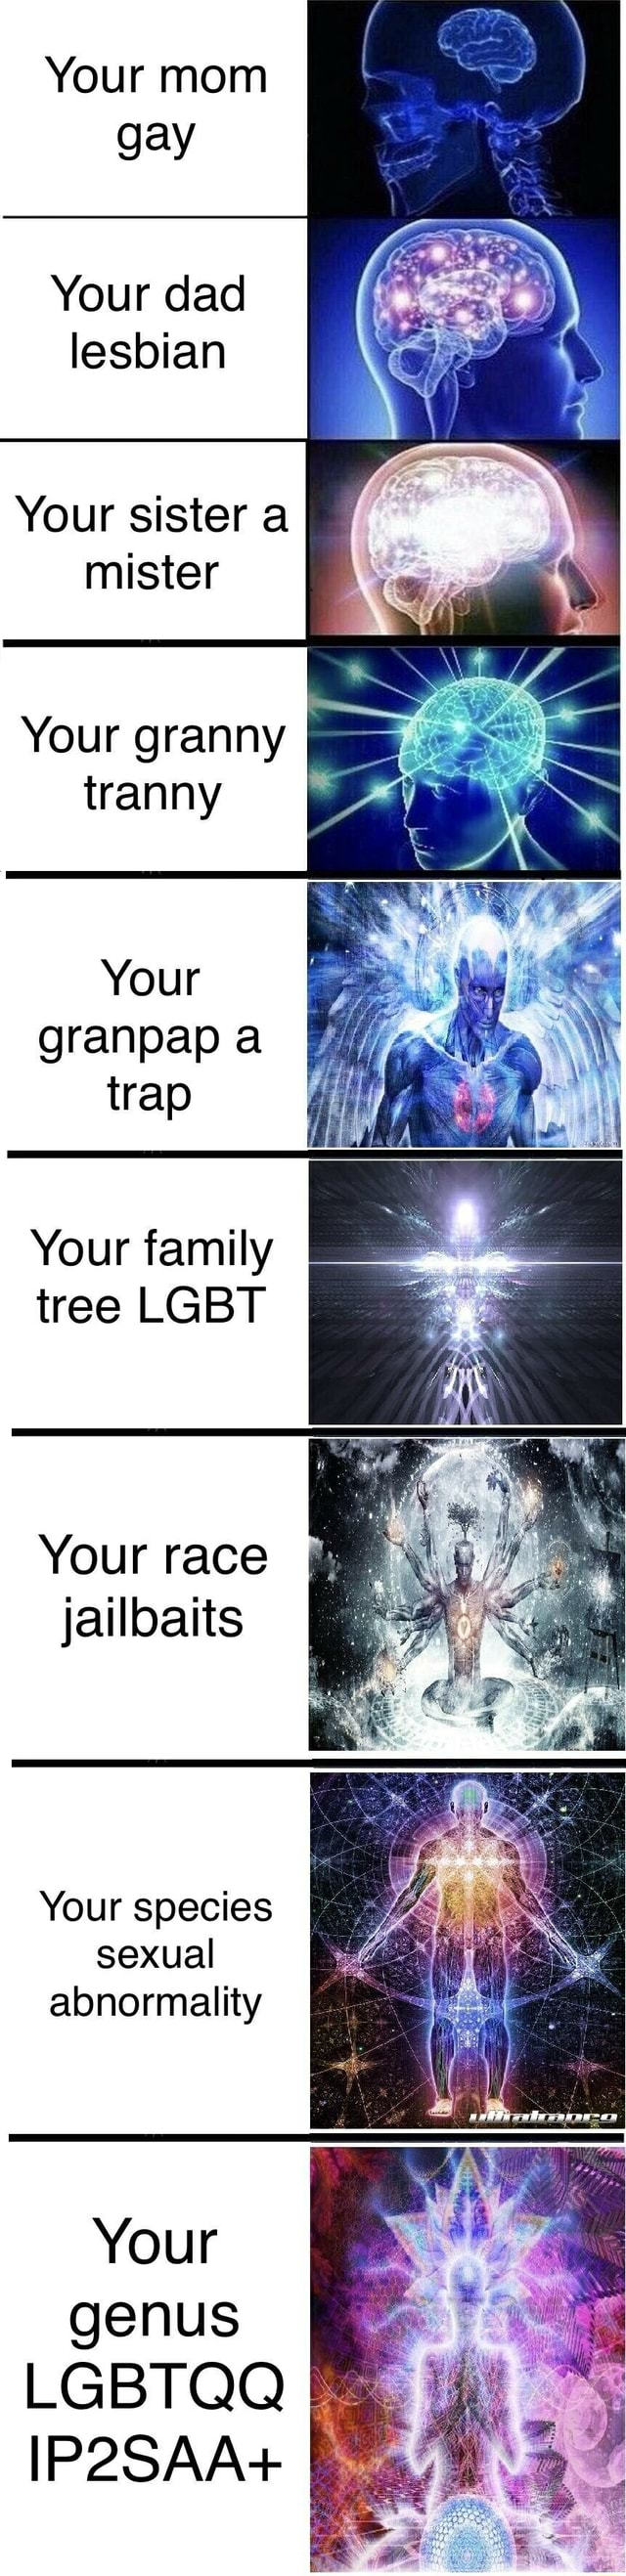 your mom the big gay meme